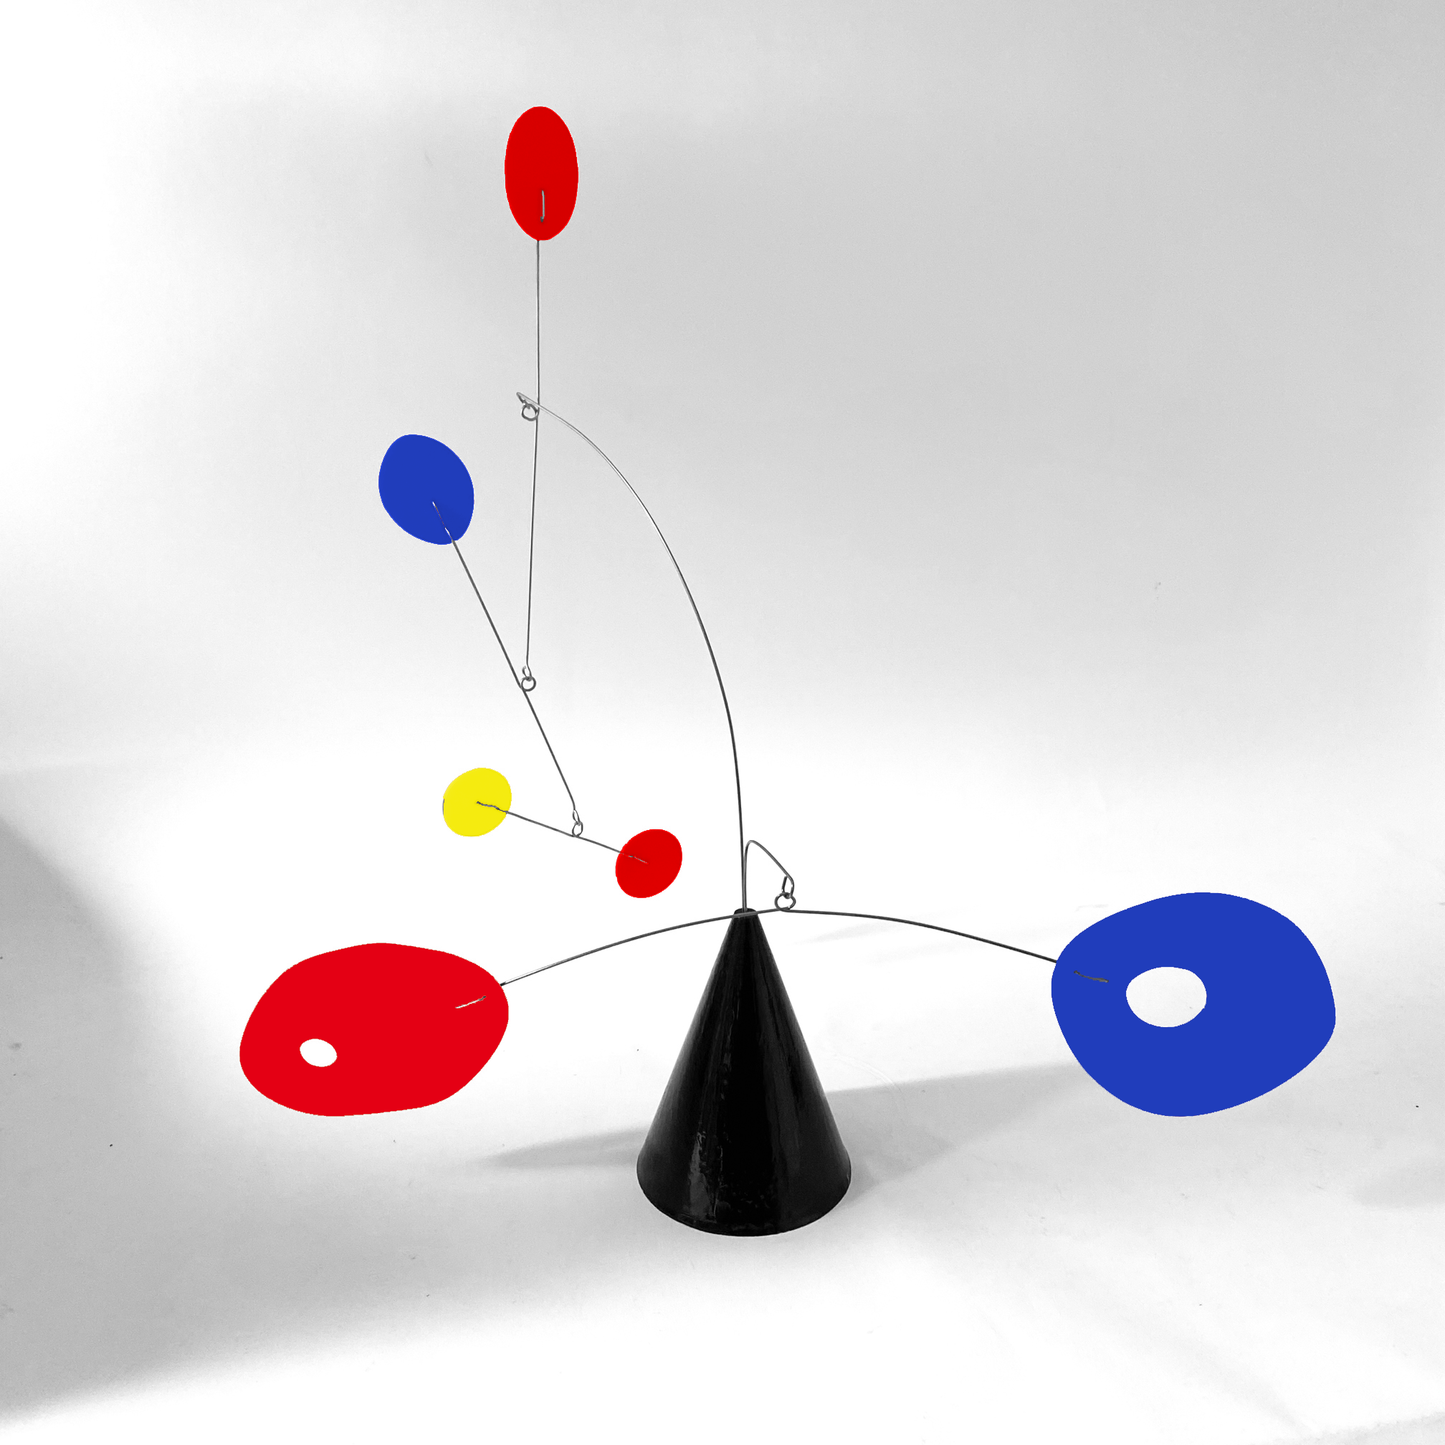 The Strobile table top kinetic art sculpture in multi colors of Red, Blue, Yellow, and Black by AtomicMobiles.com